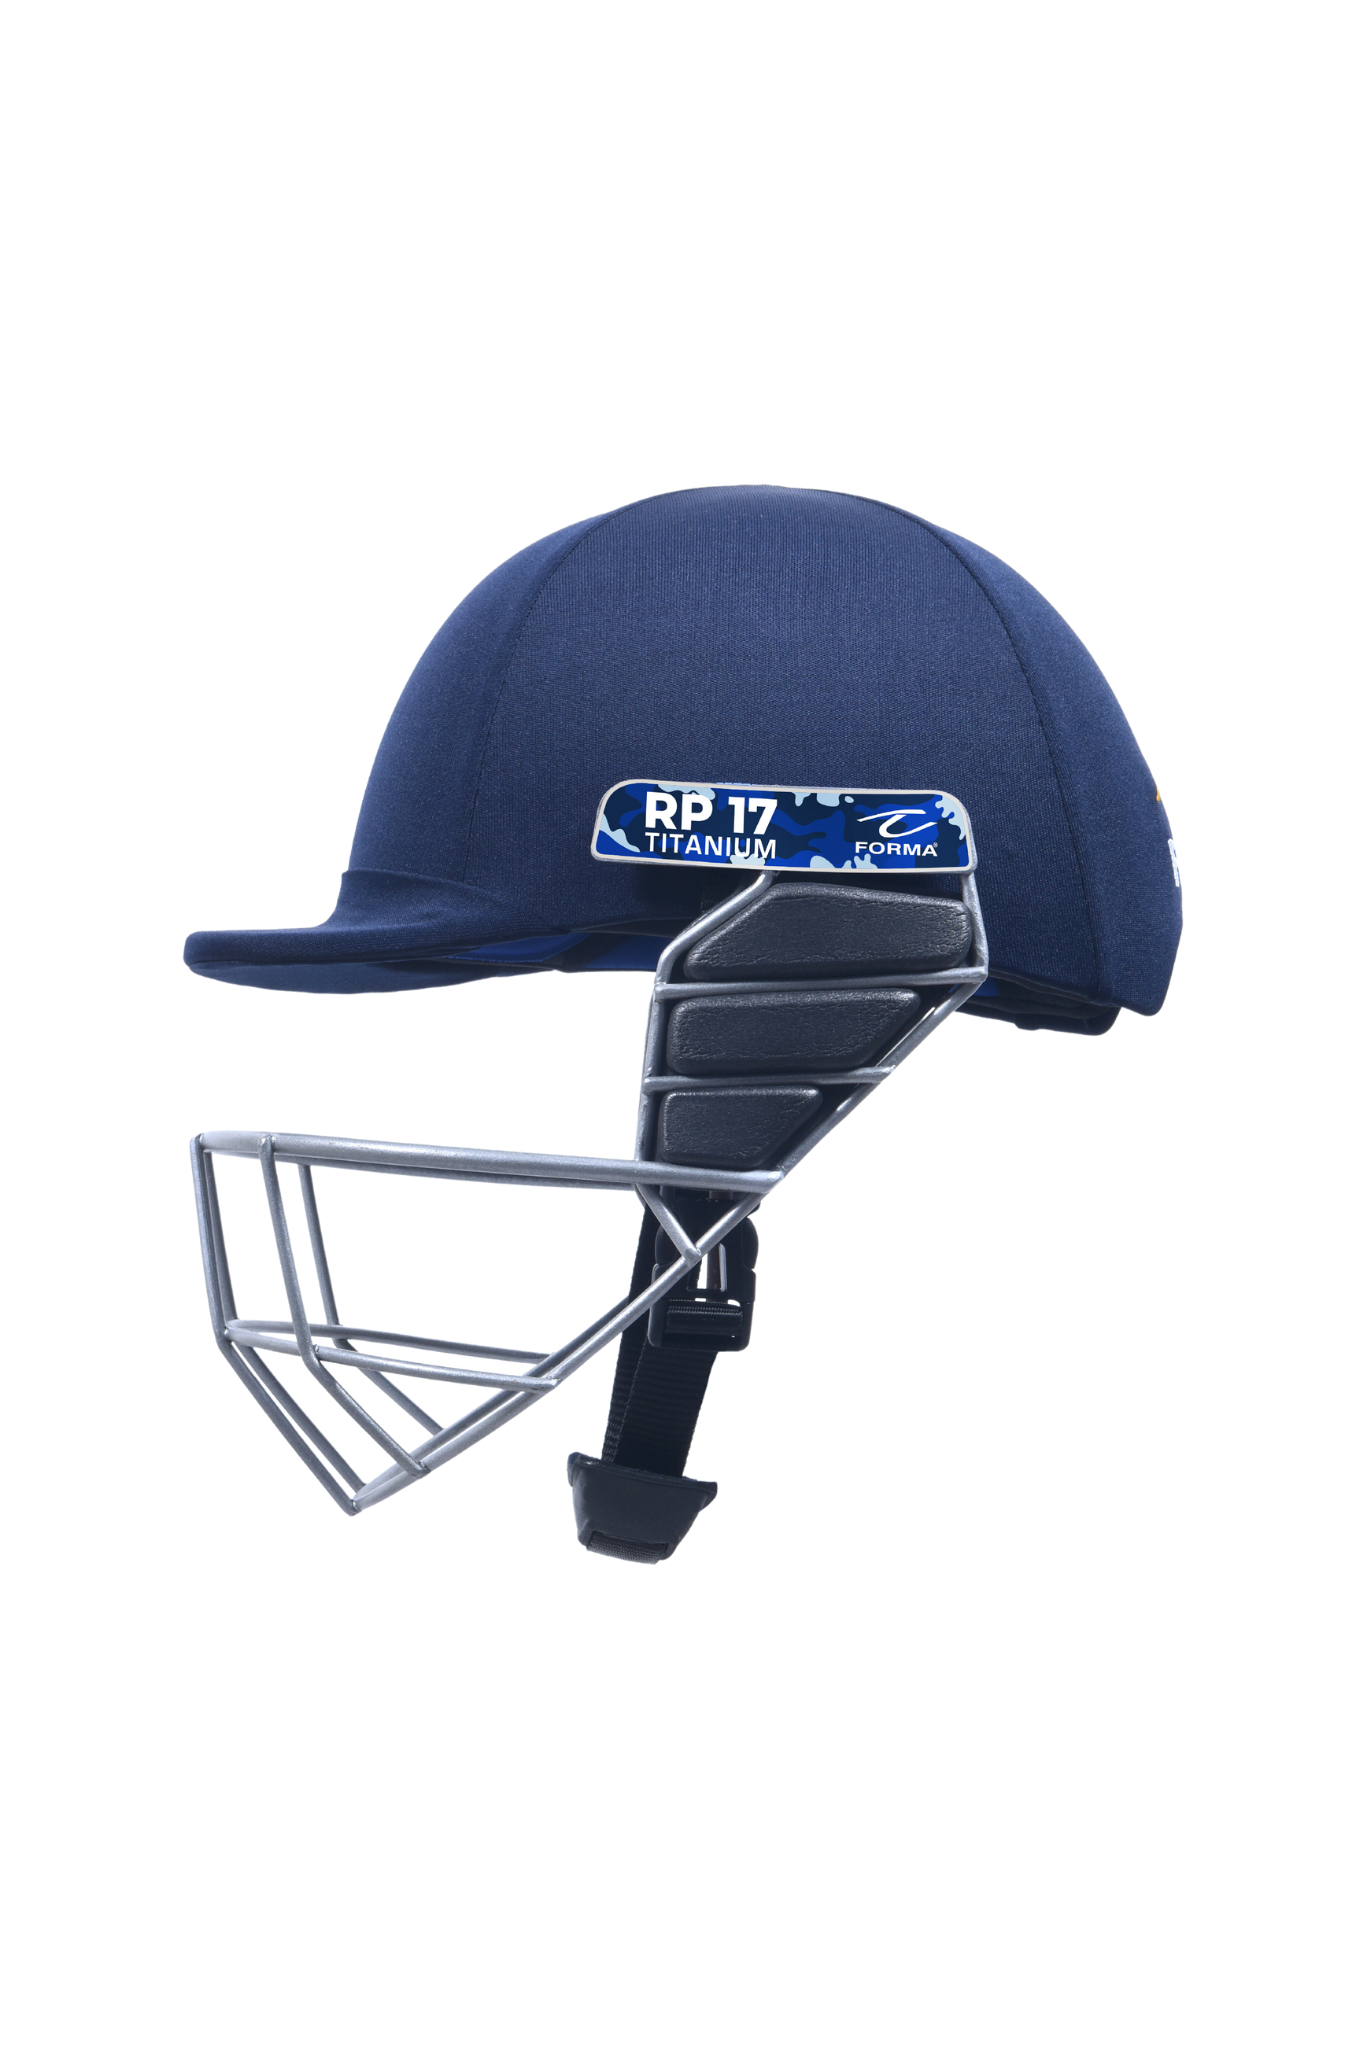 RP-17 WICKET KEEPING CAMOUFLAGE